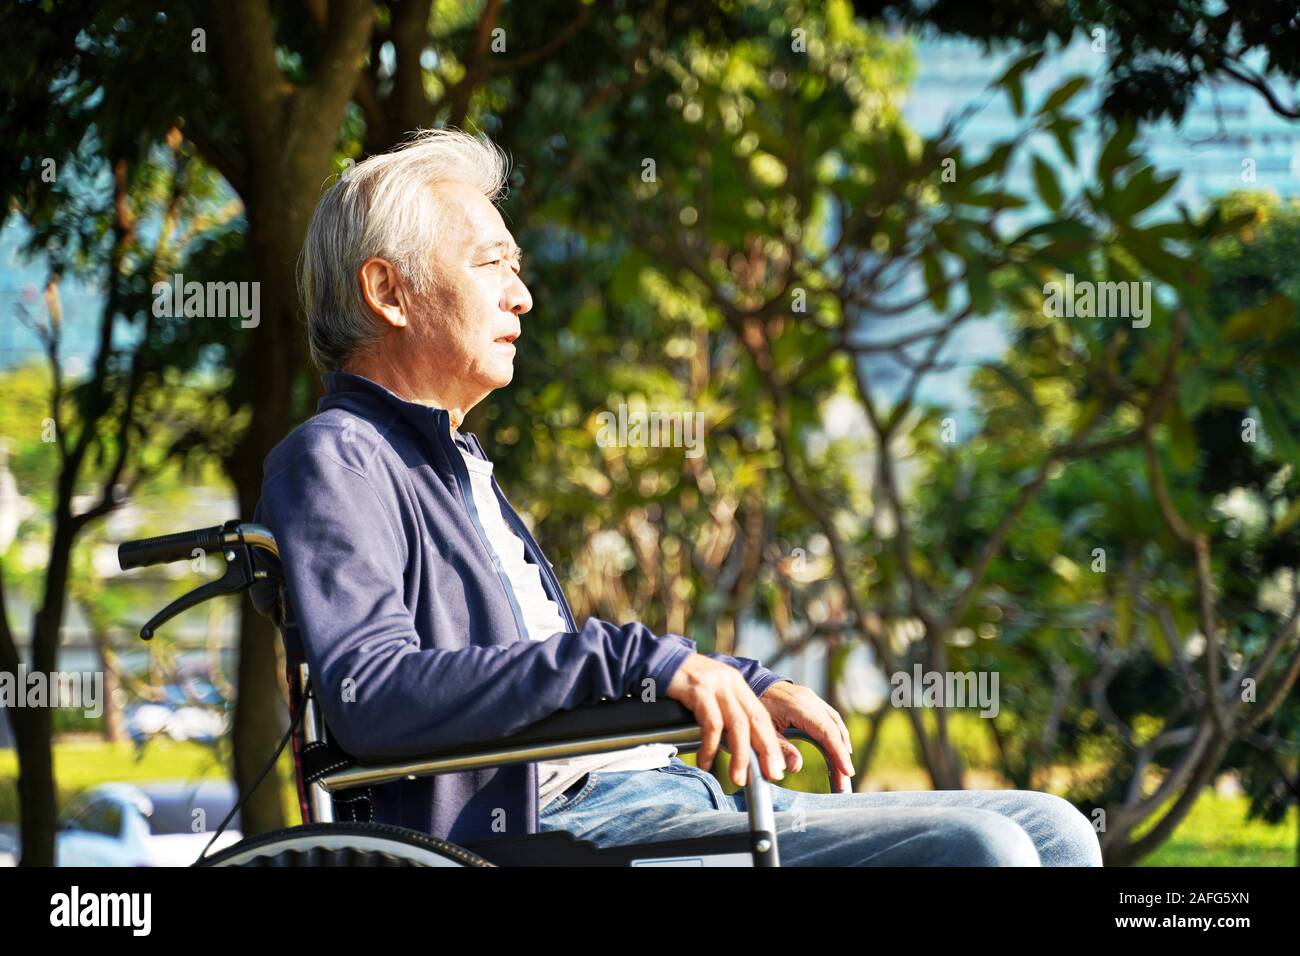 side view of asian senior man sitting in wheel chair outdoors Stock Photo